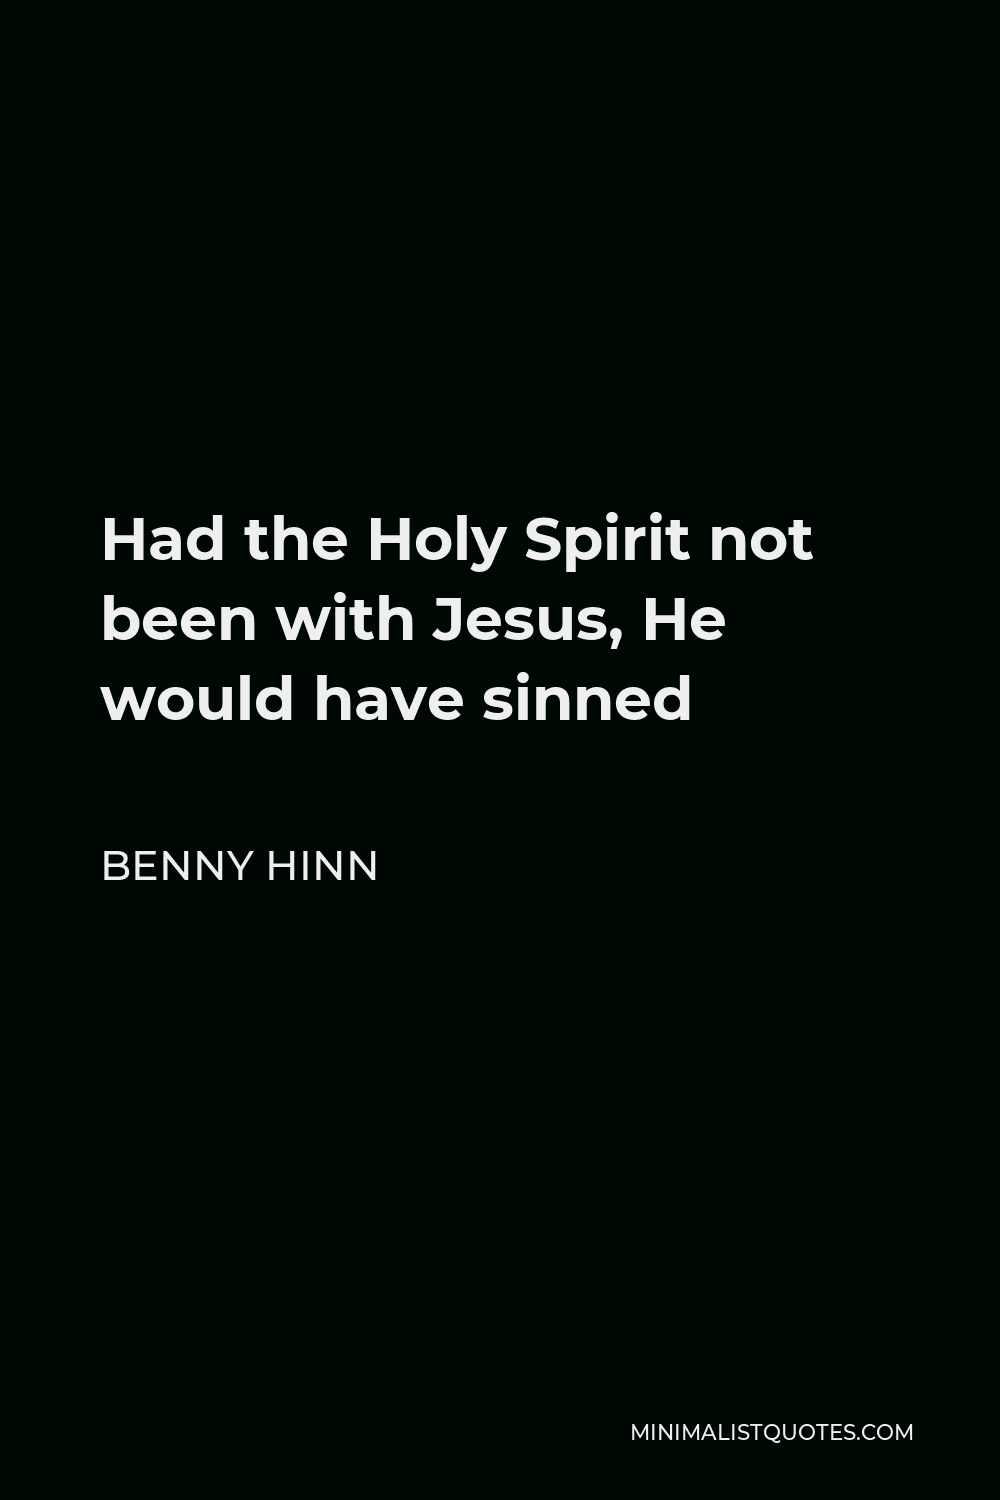 Benny Hinn Quote - Had the Holy Spirit not been with Jesus, He would have sinned